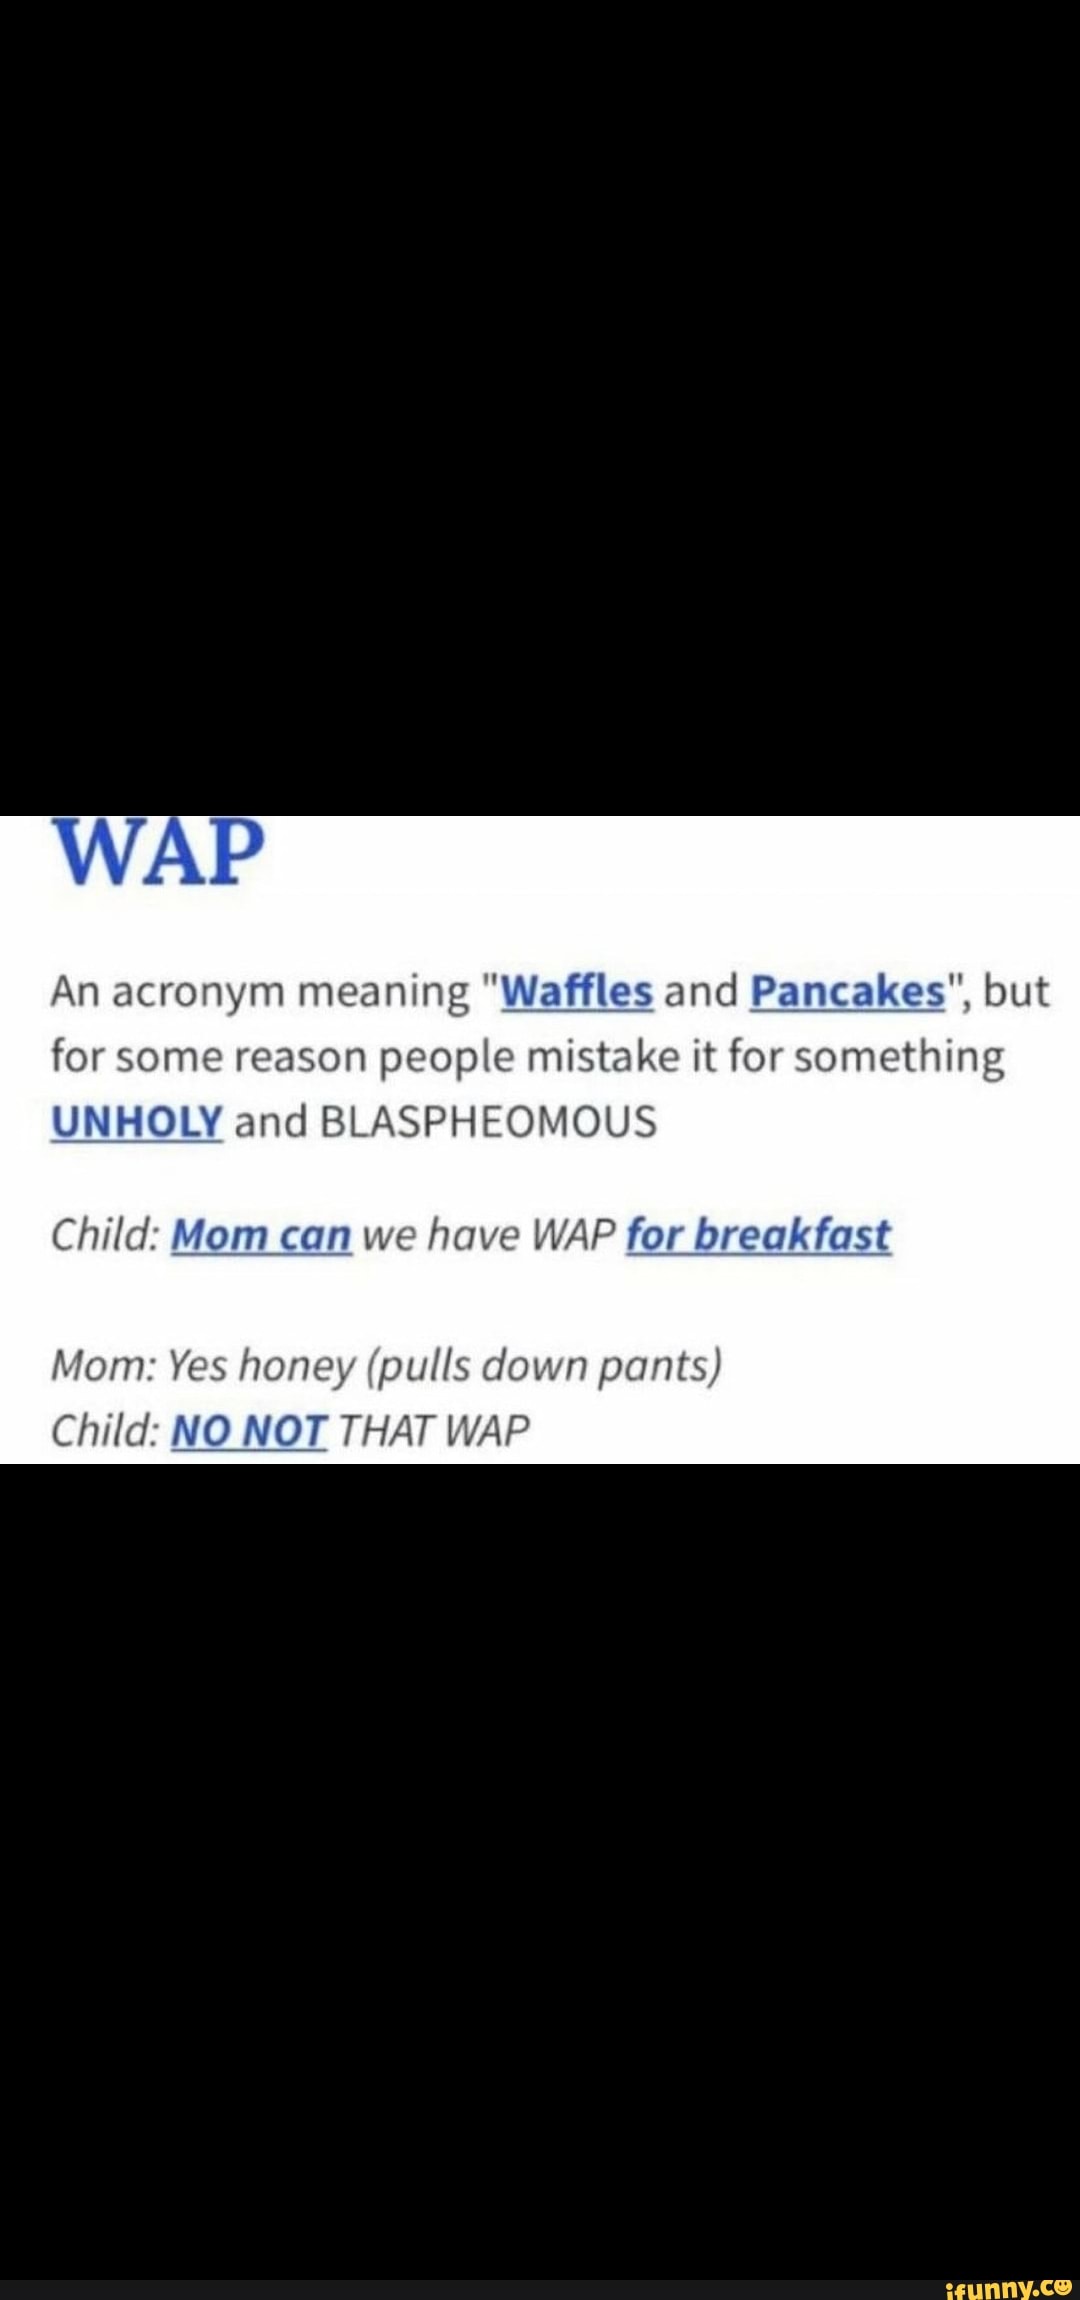 Wap An Acronym Meaning Waffles And Pancakes But For Some Reason People Mistake It For Something